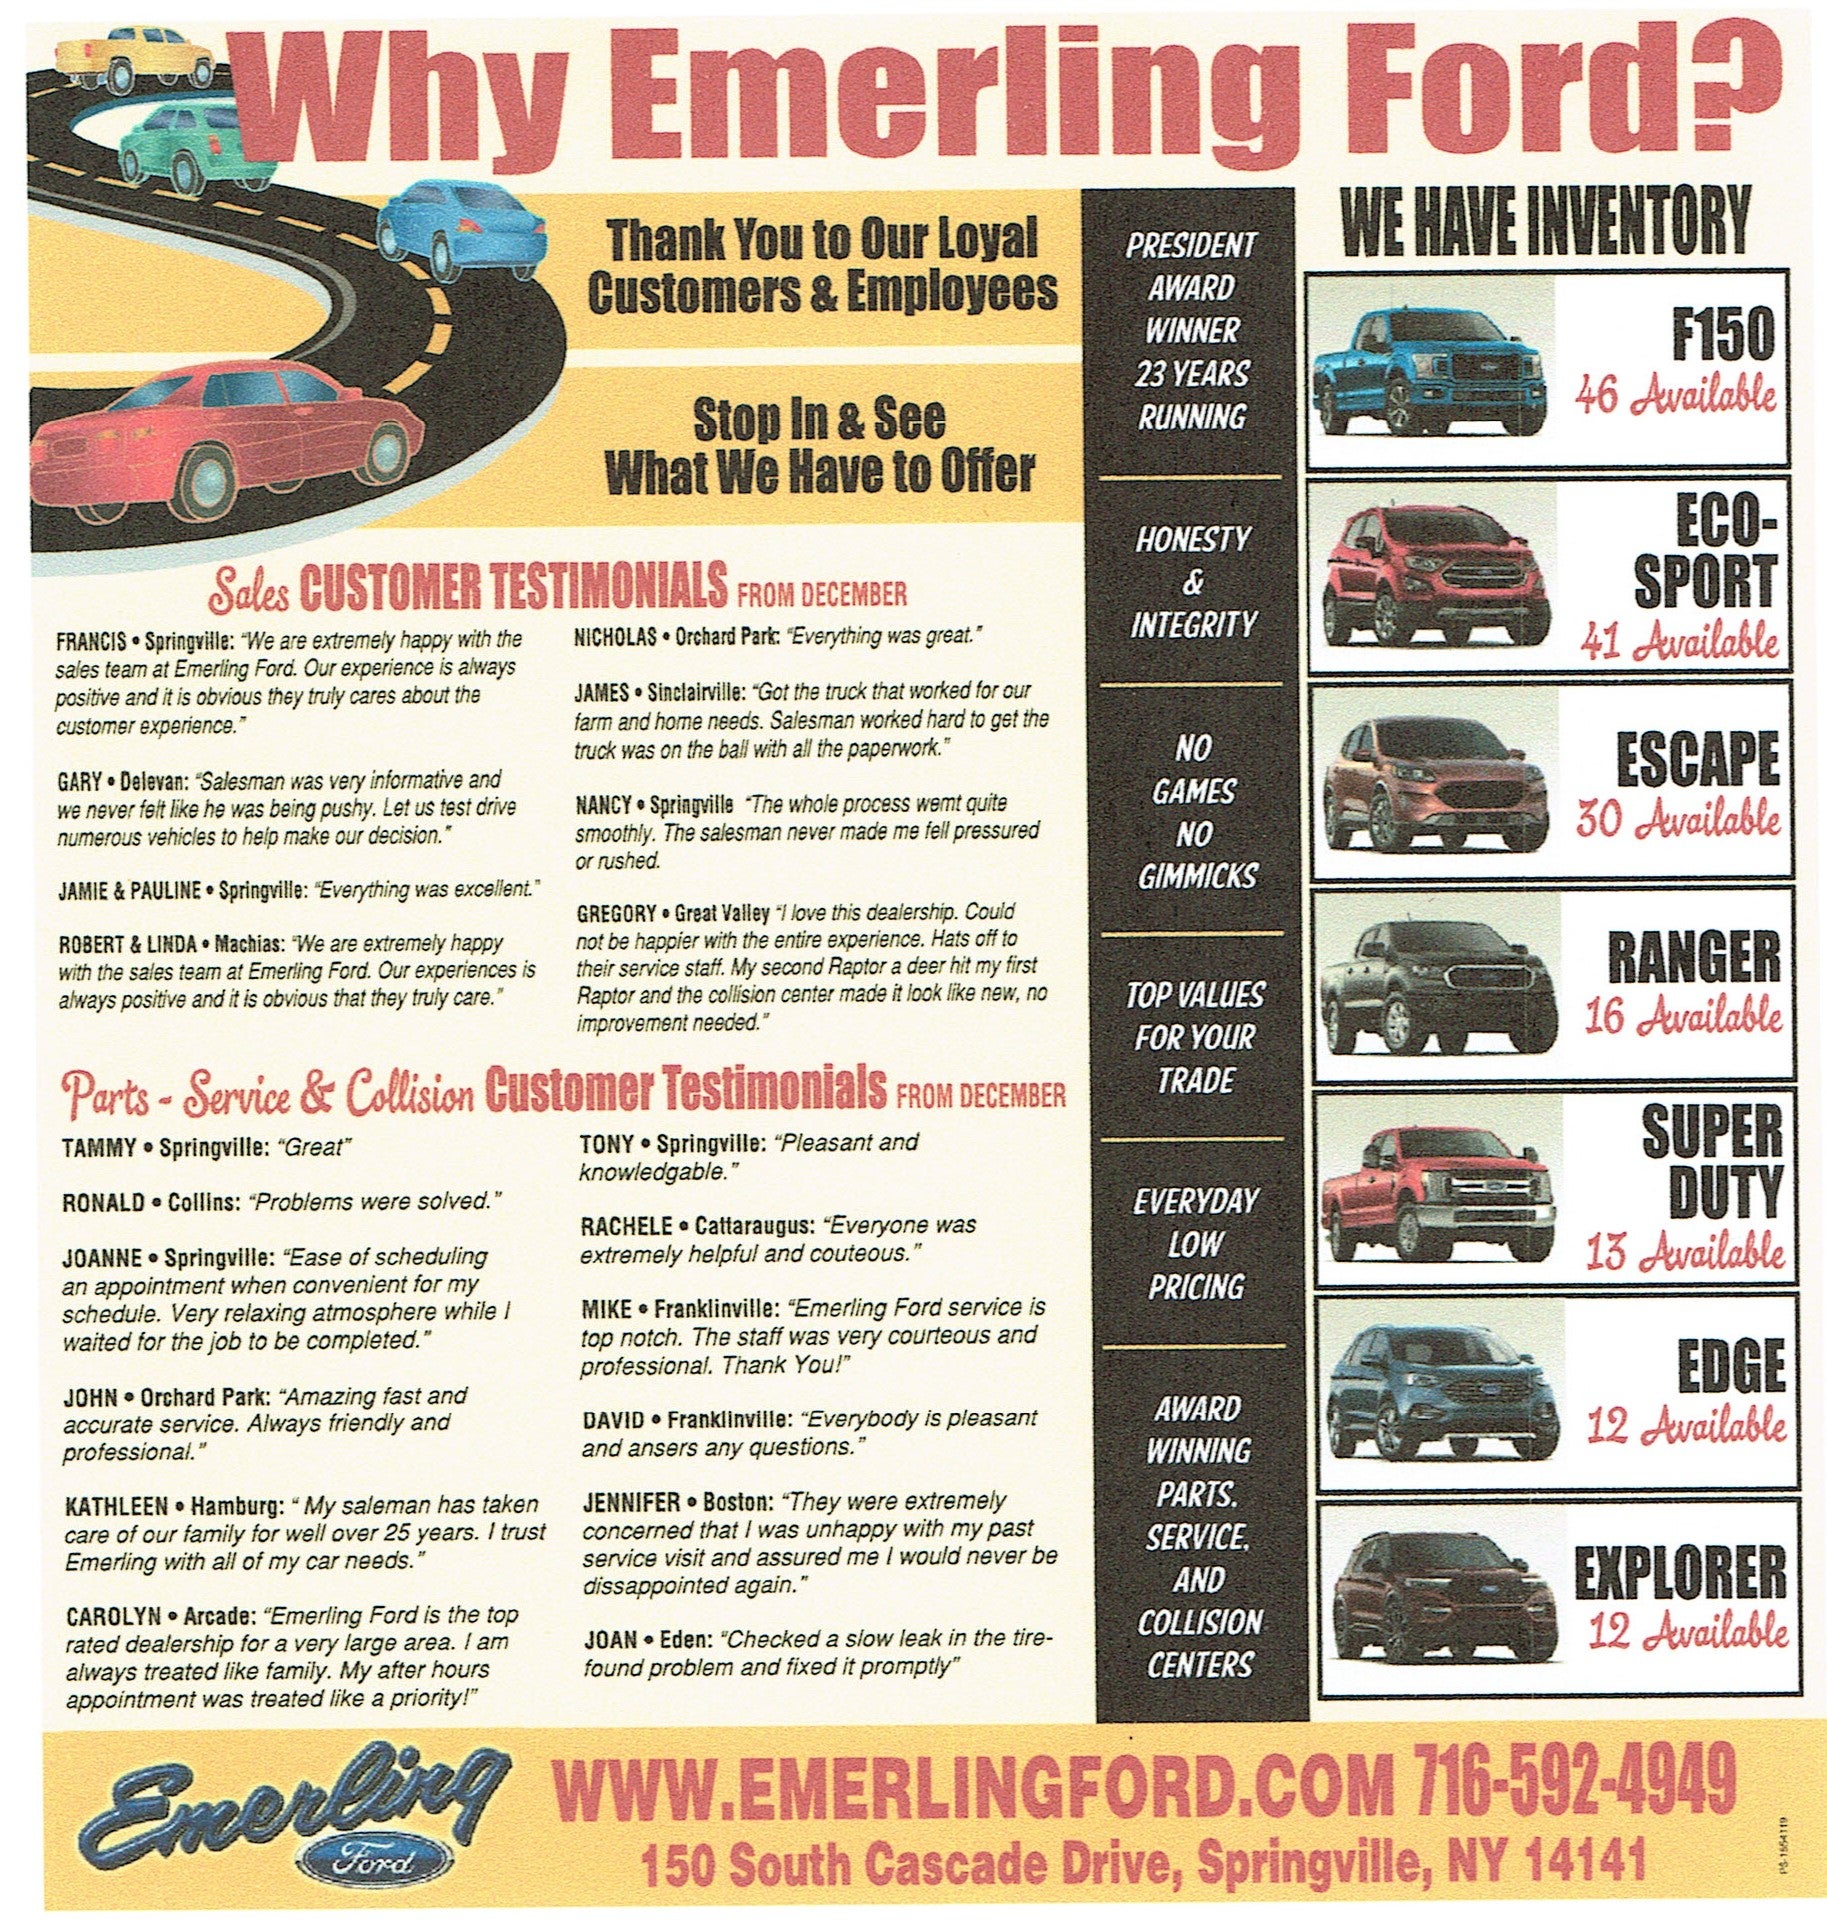 Testimonials at Emerling Ford